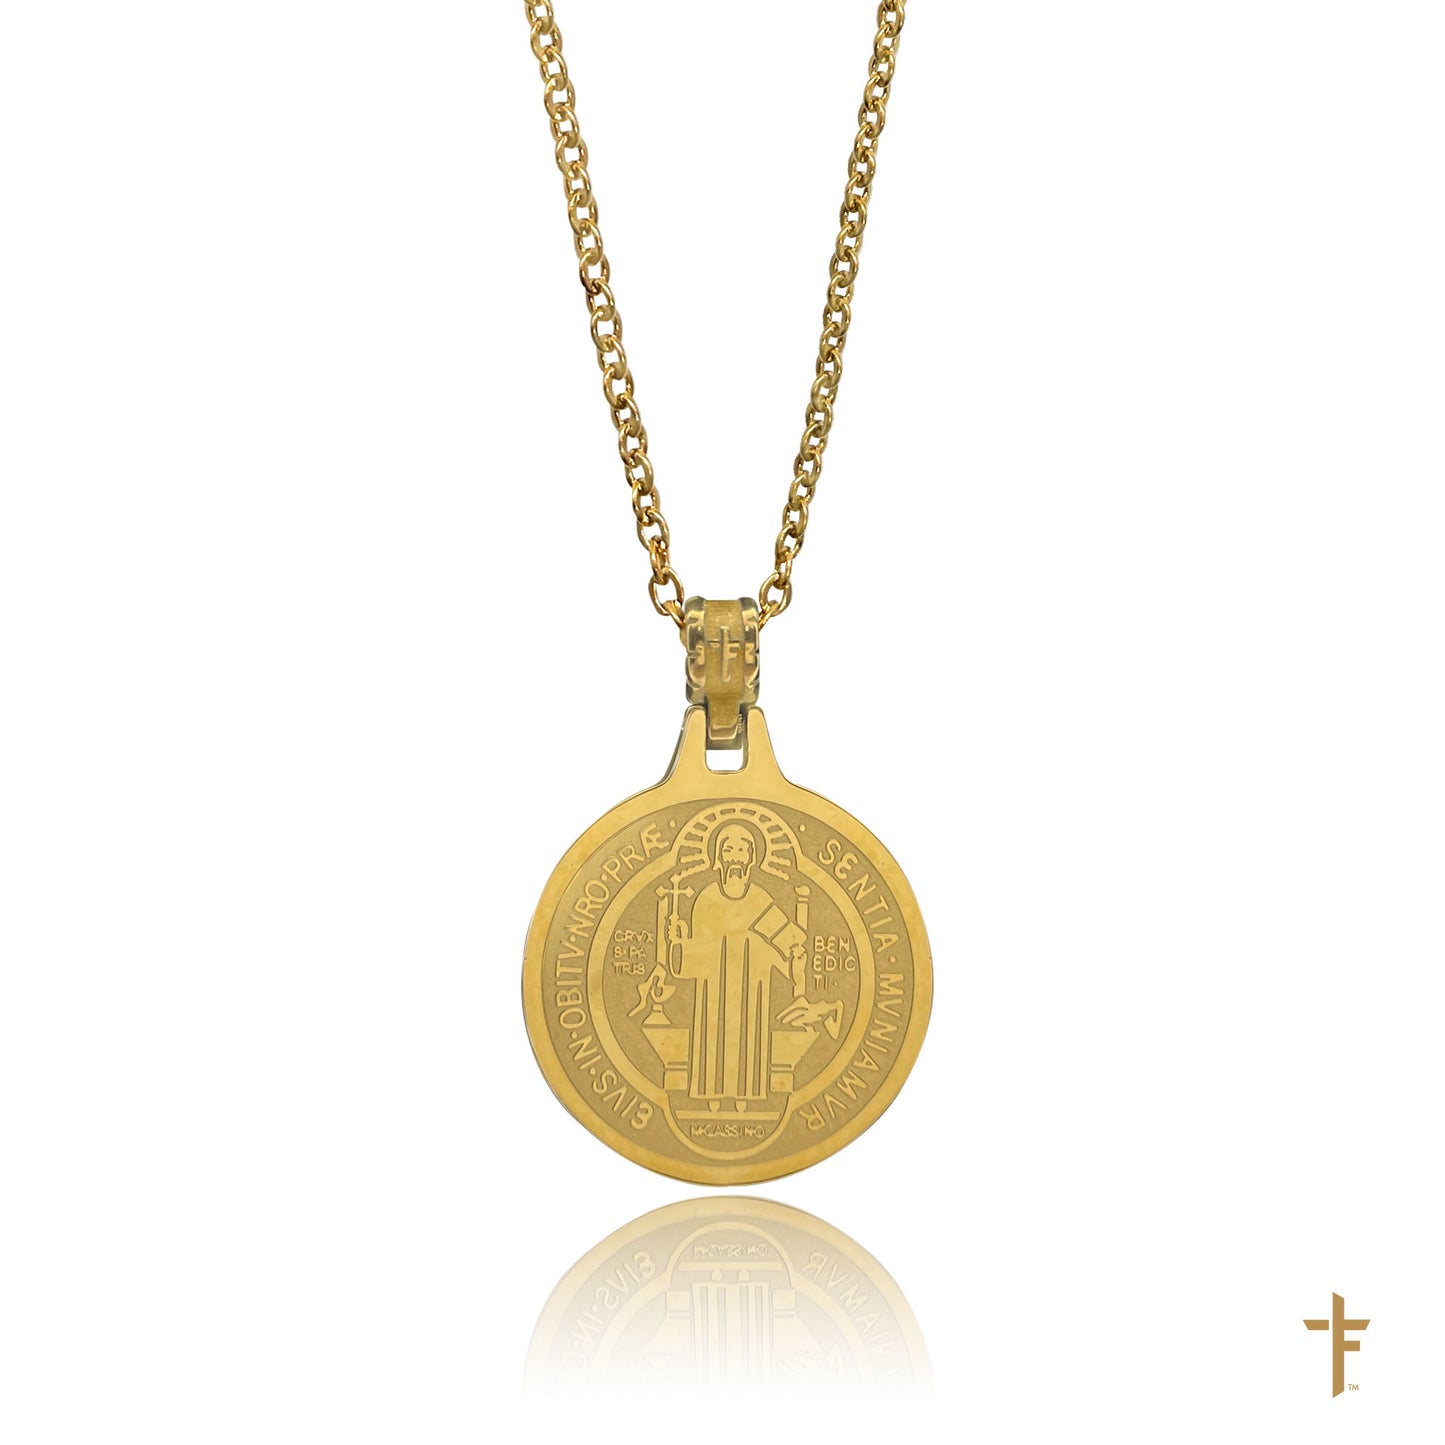 Saint Benedict Necklace with Bracelet (The Protector)